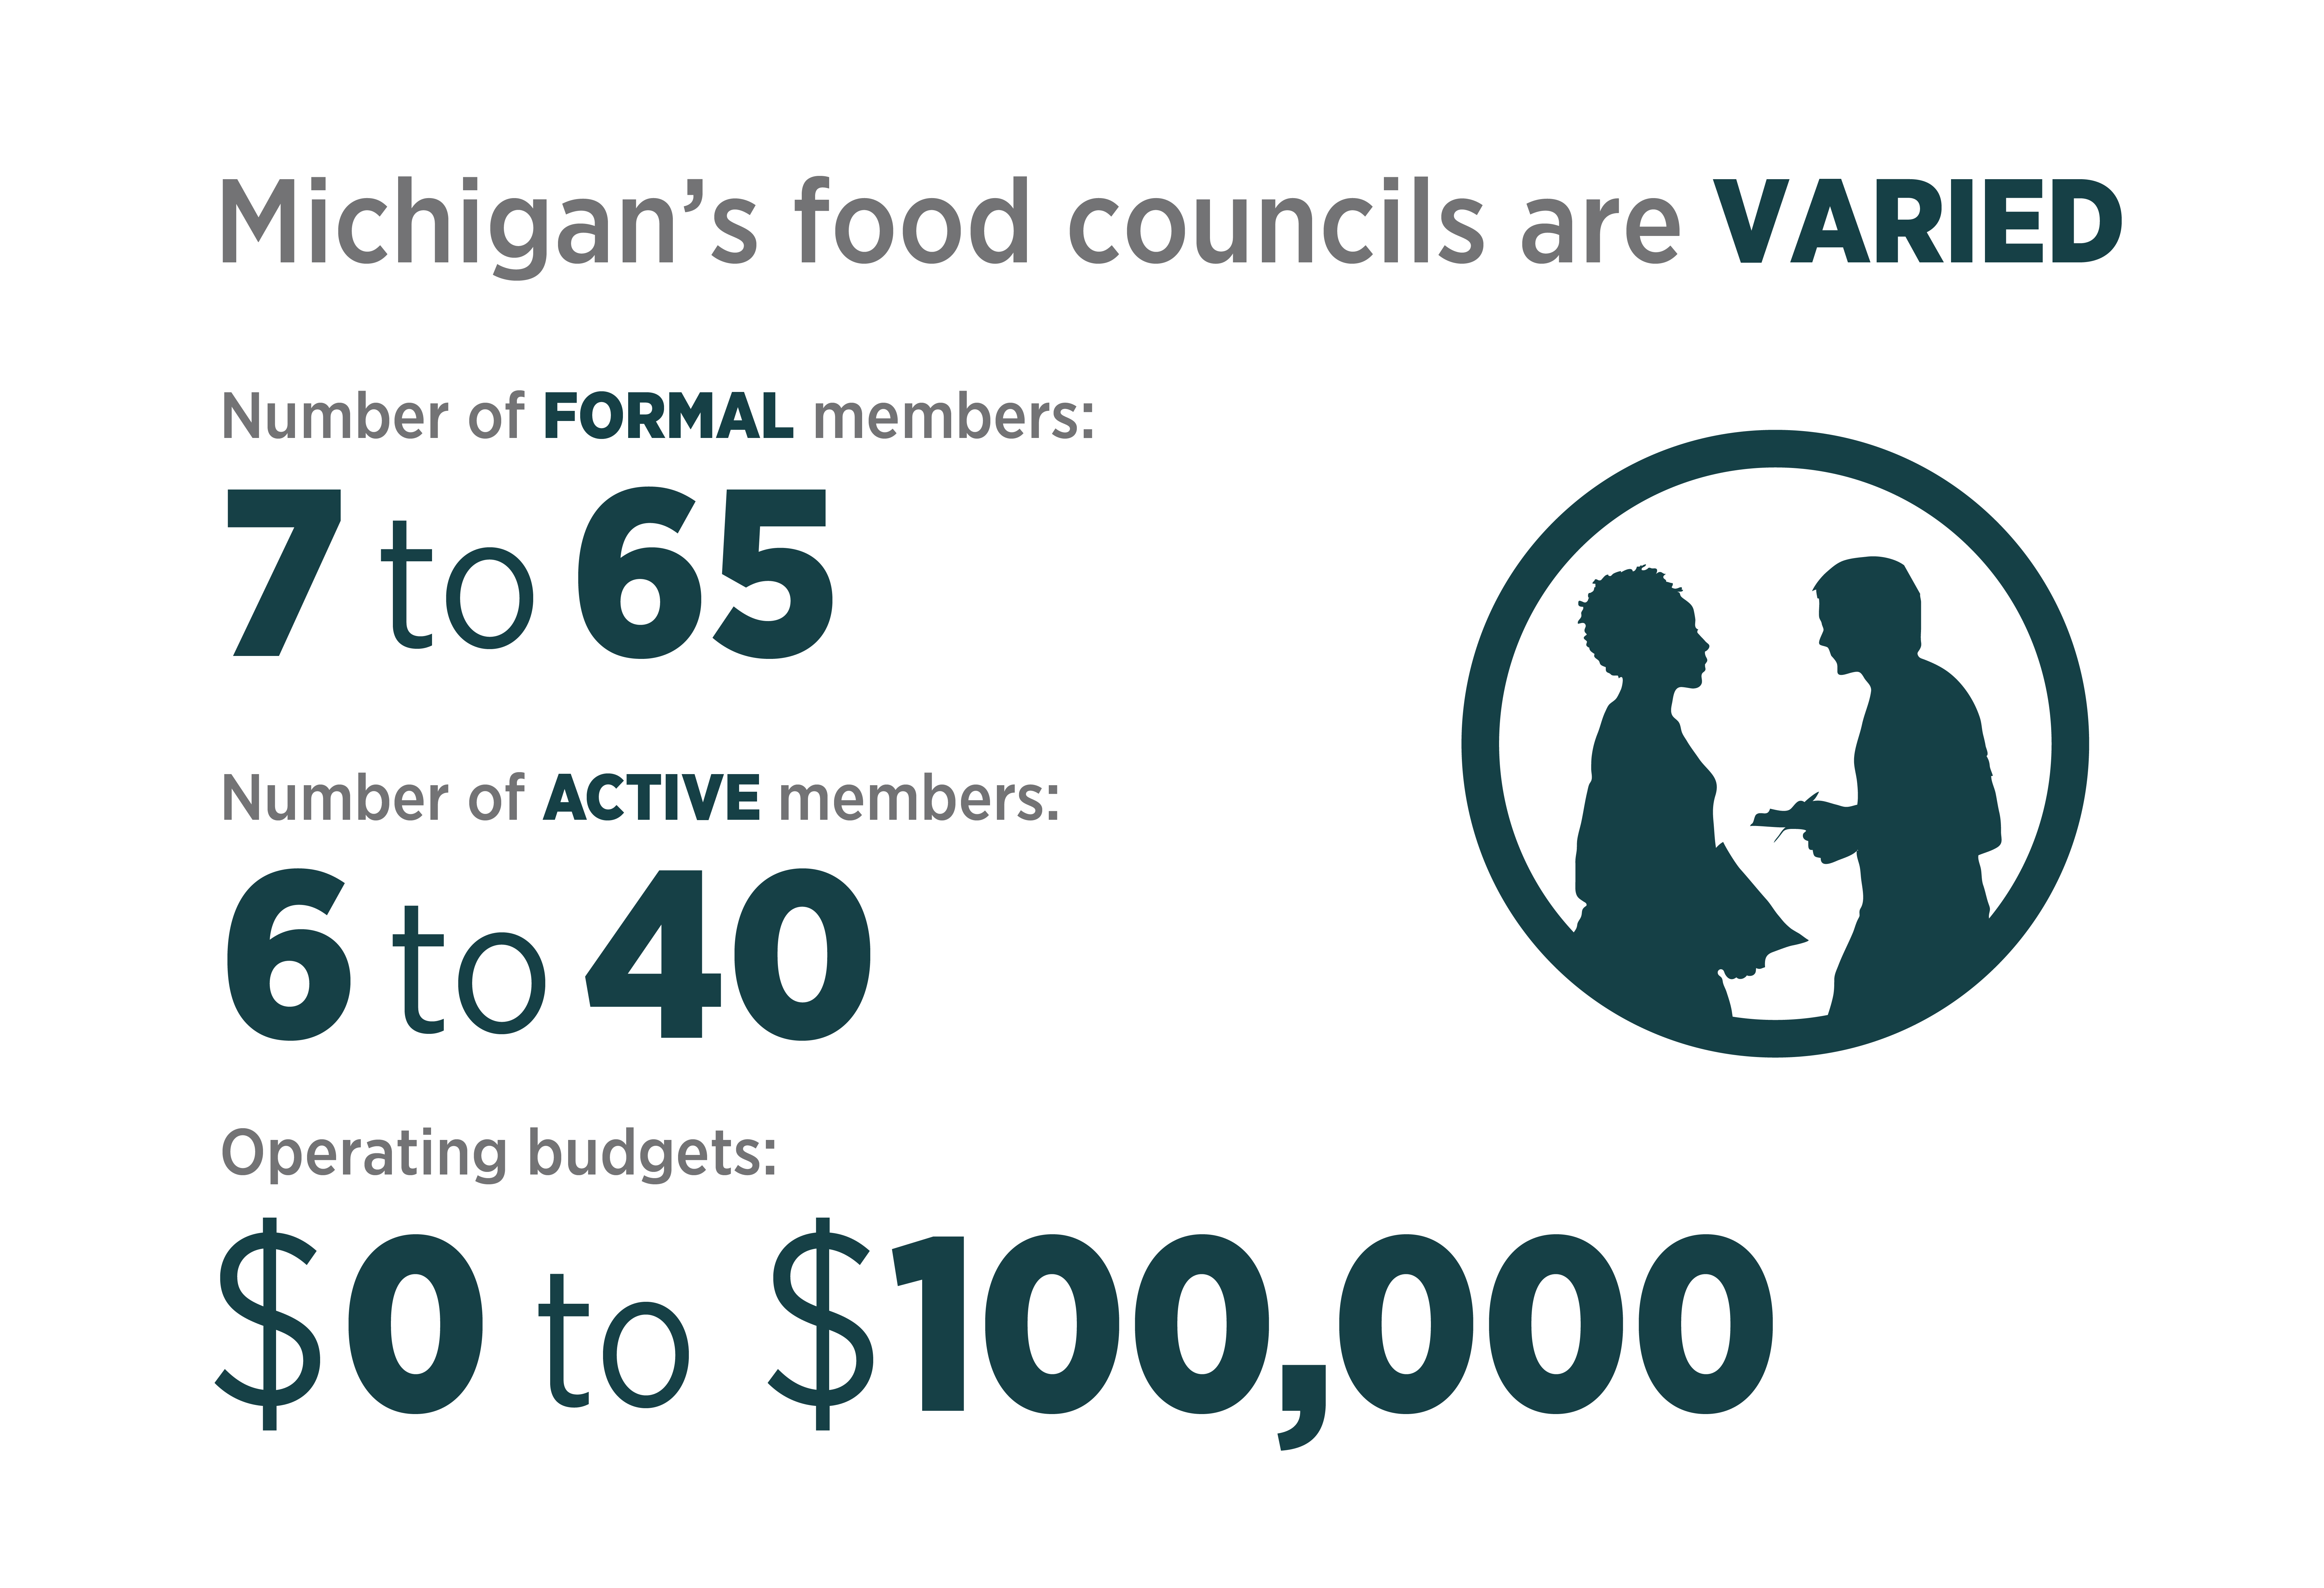 Michigan's food councils are varied